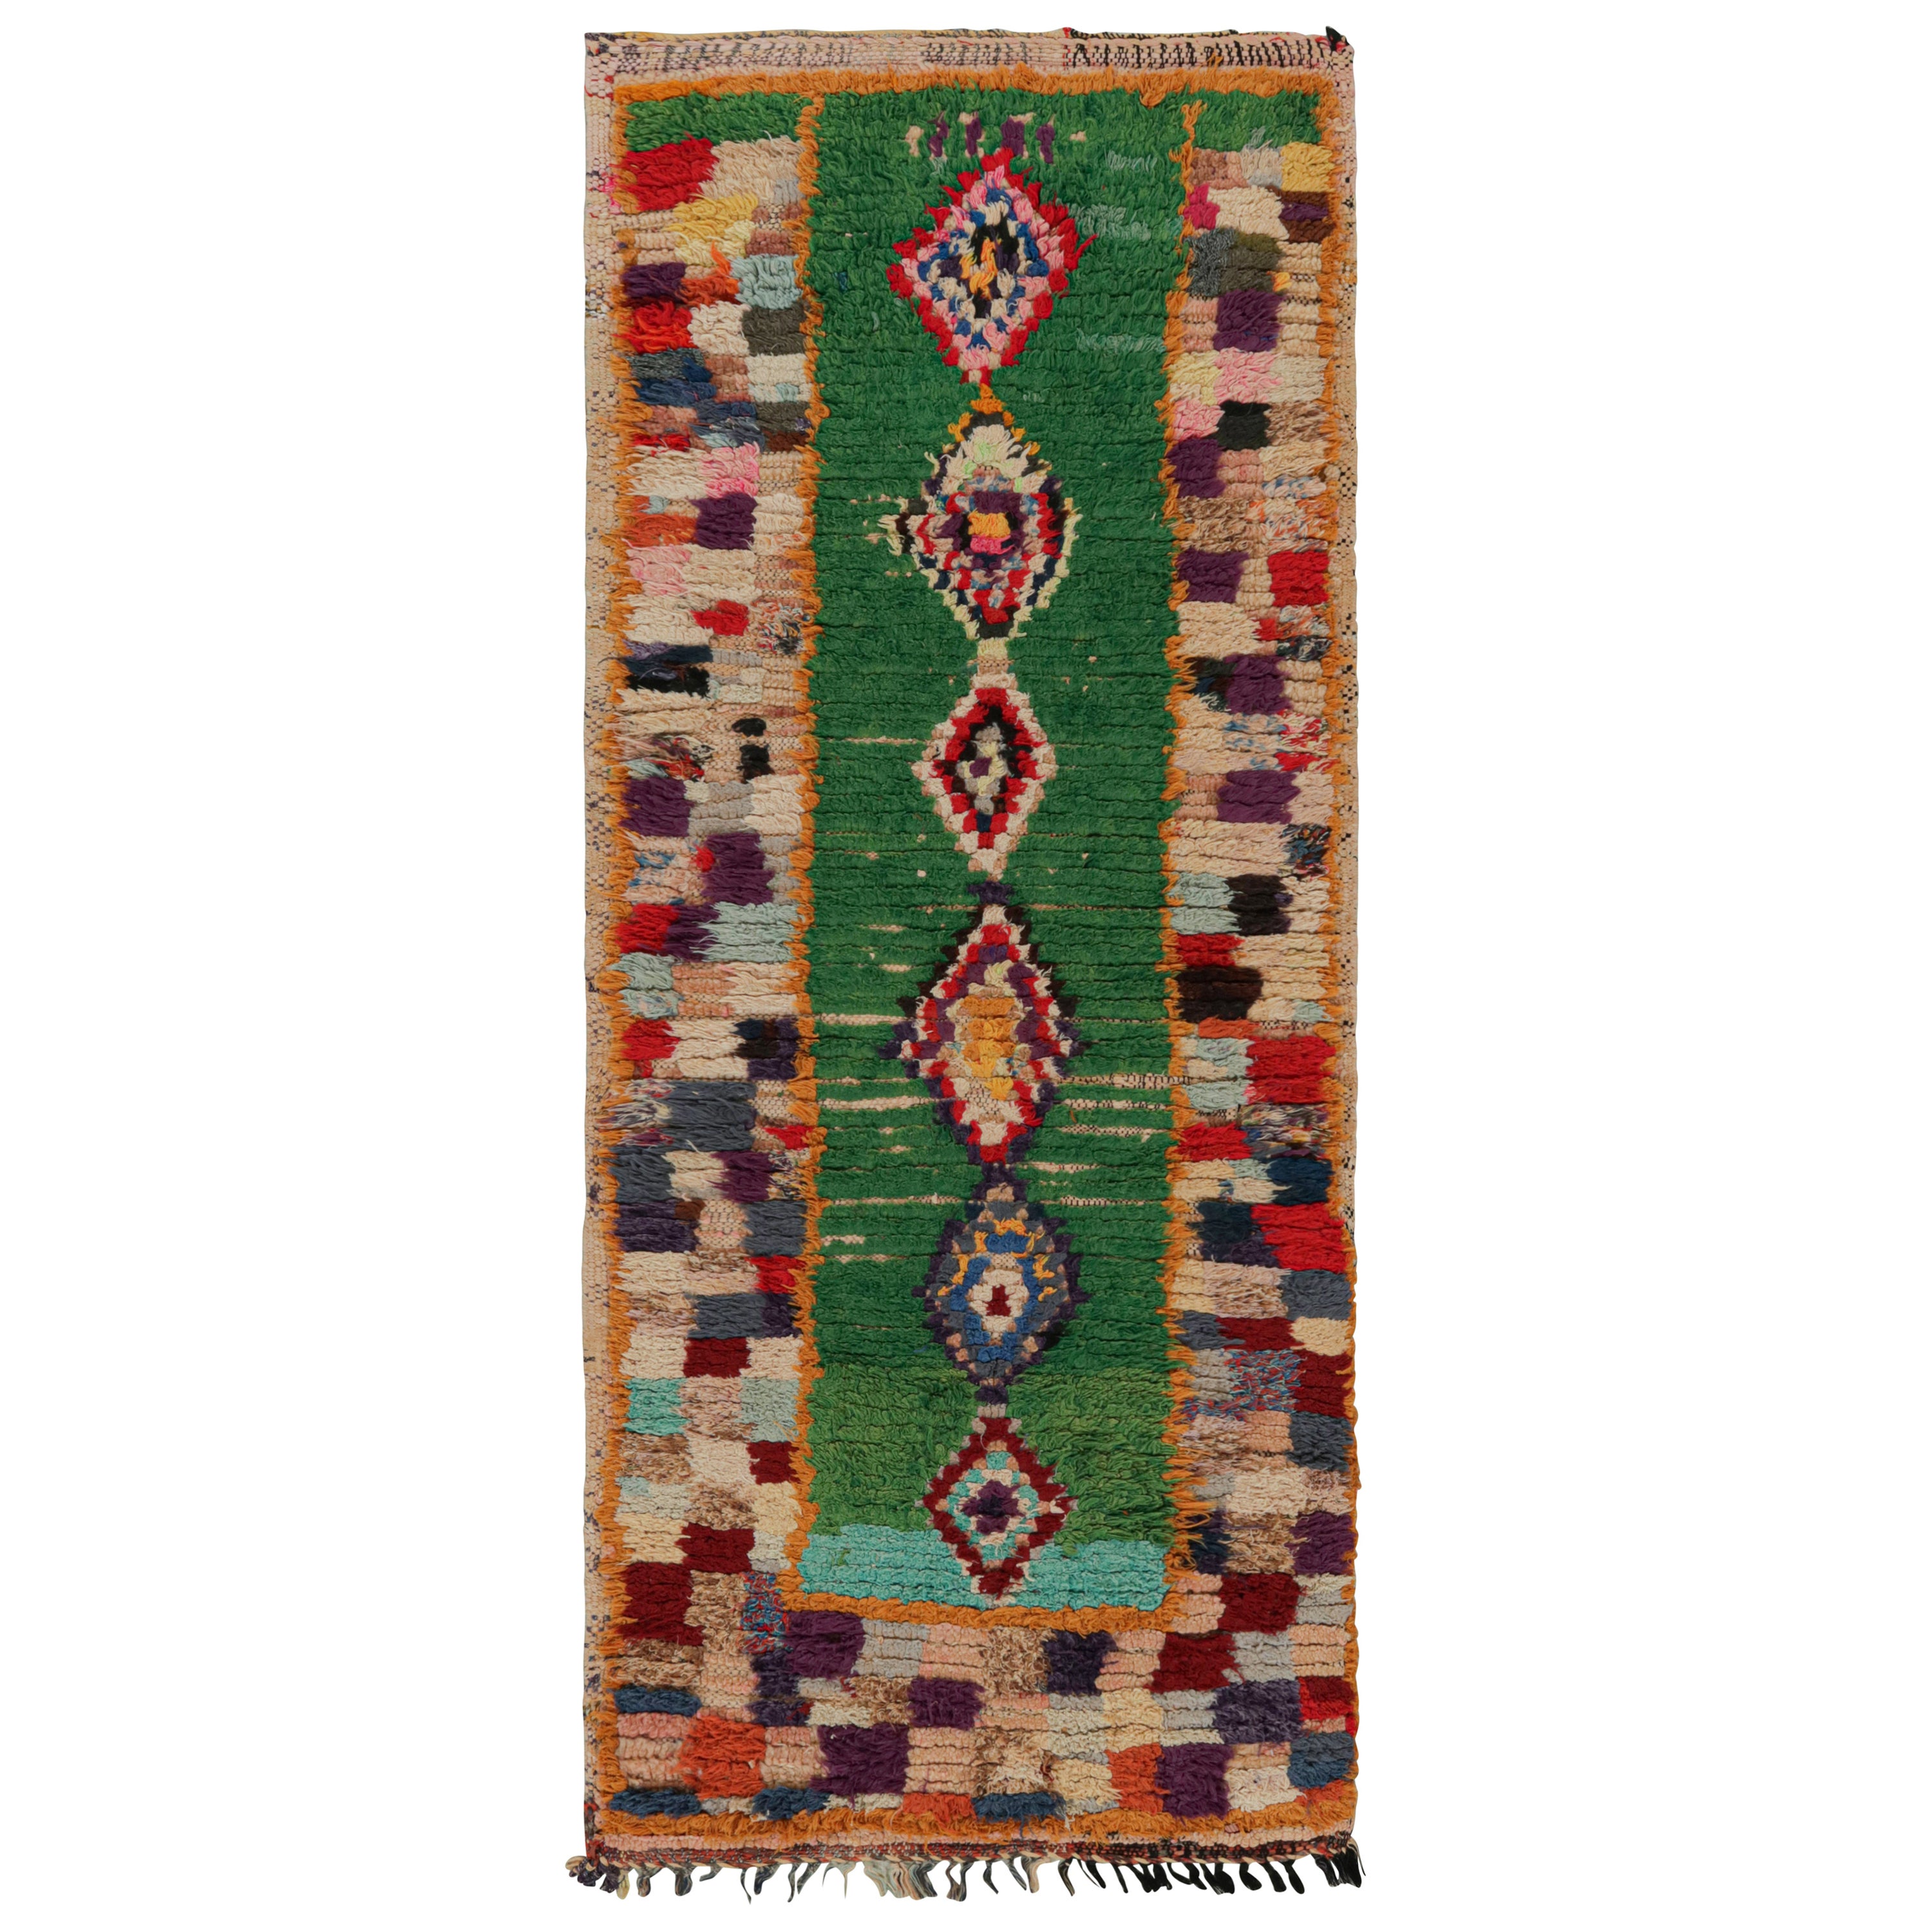 Vintage Azilal Moroccan Style Rug, with Geometric Patterns, from Rug & Kilim For Sale